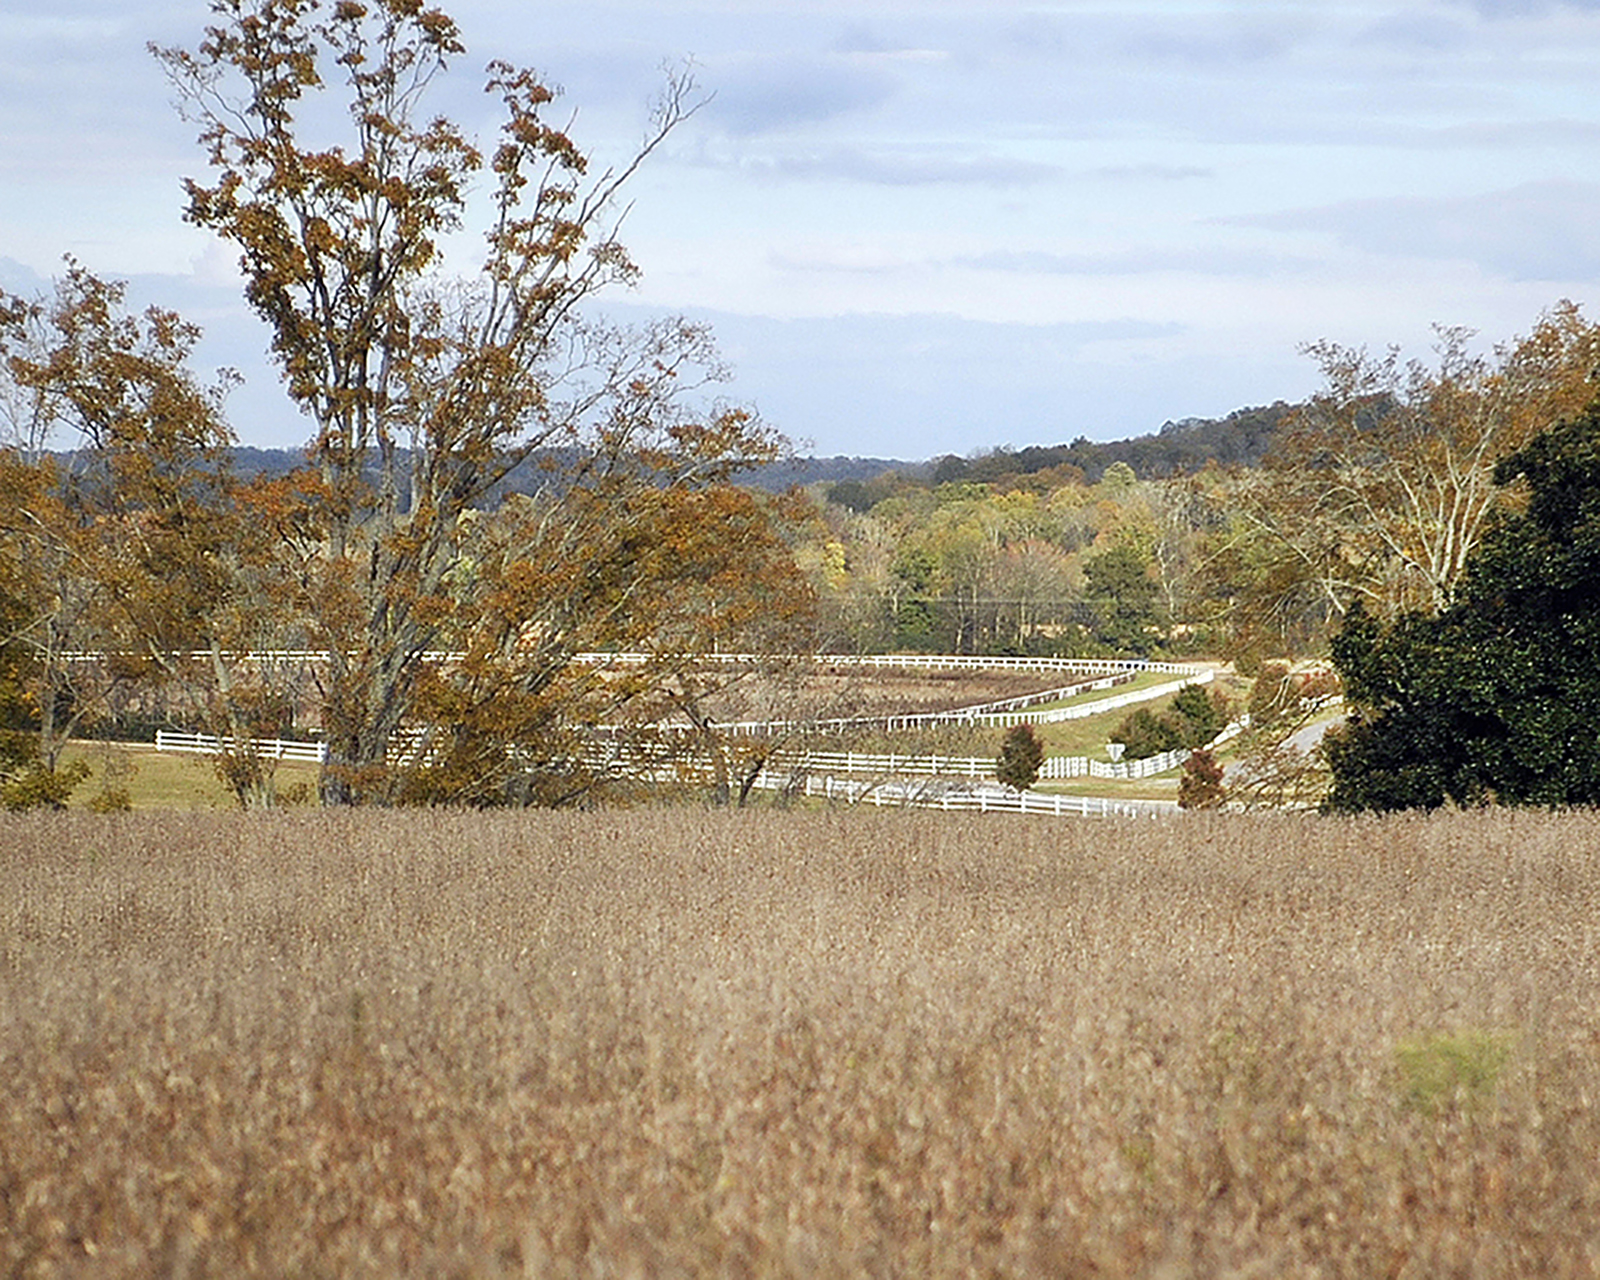 Distant view of the old white-painted fences and racetrack on the Milky Way Farm in Giles County, TN.